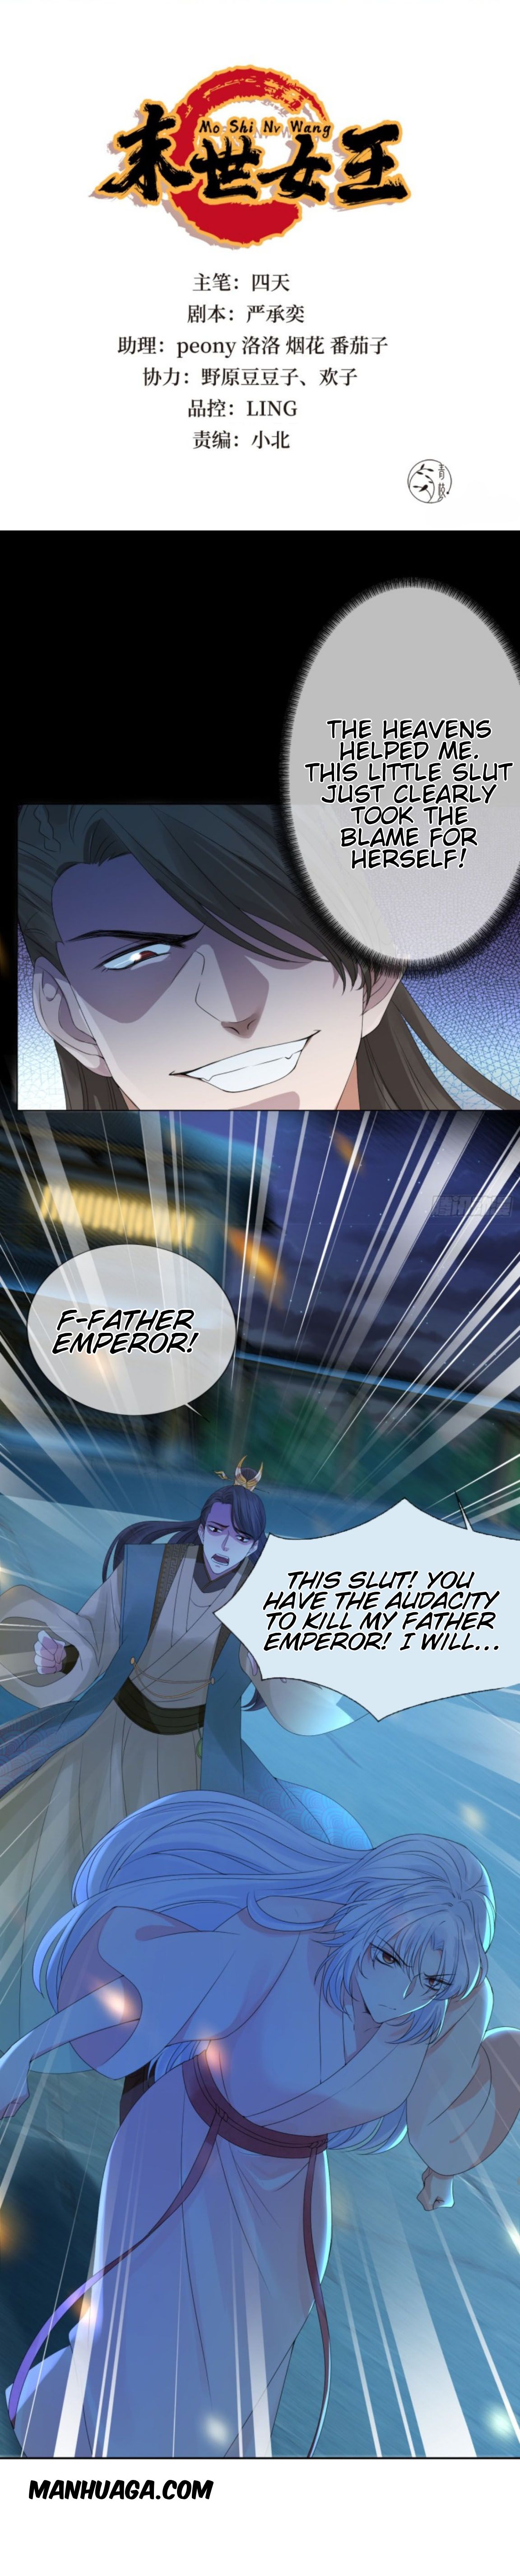 Empress Of The Last Days - Page 2